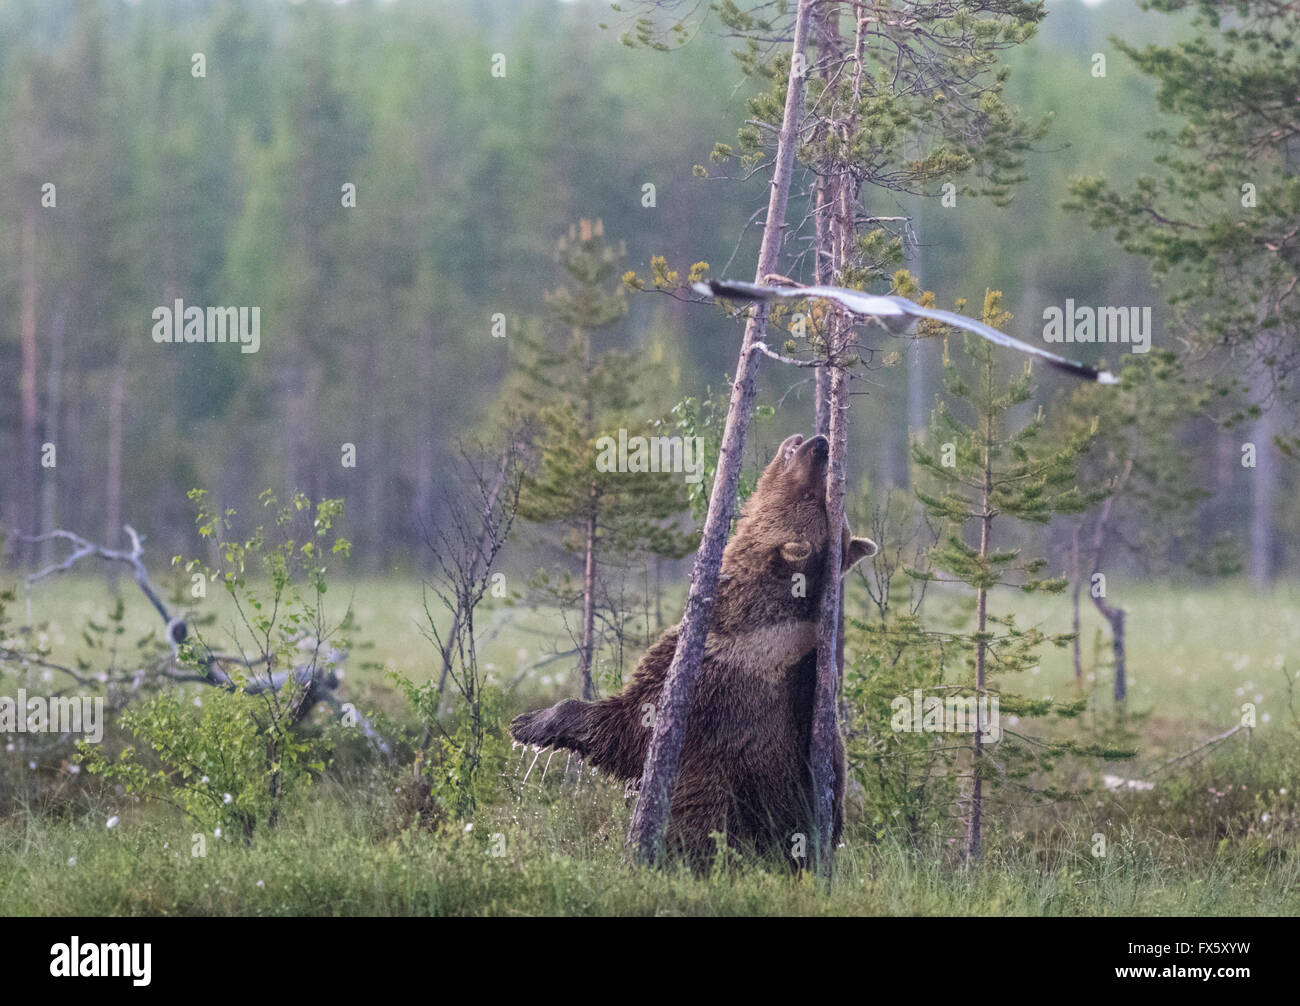 Brown bear, Ursus arctos, Standing on his back legs stretching himself towards a Common gull flying over him, Kuhmo, Finland Stock Photo